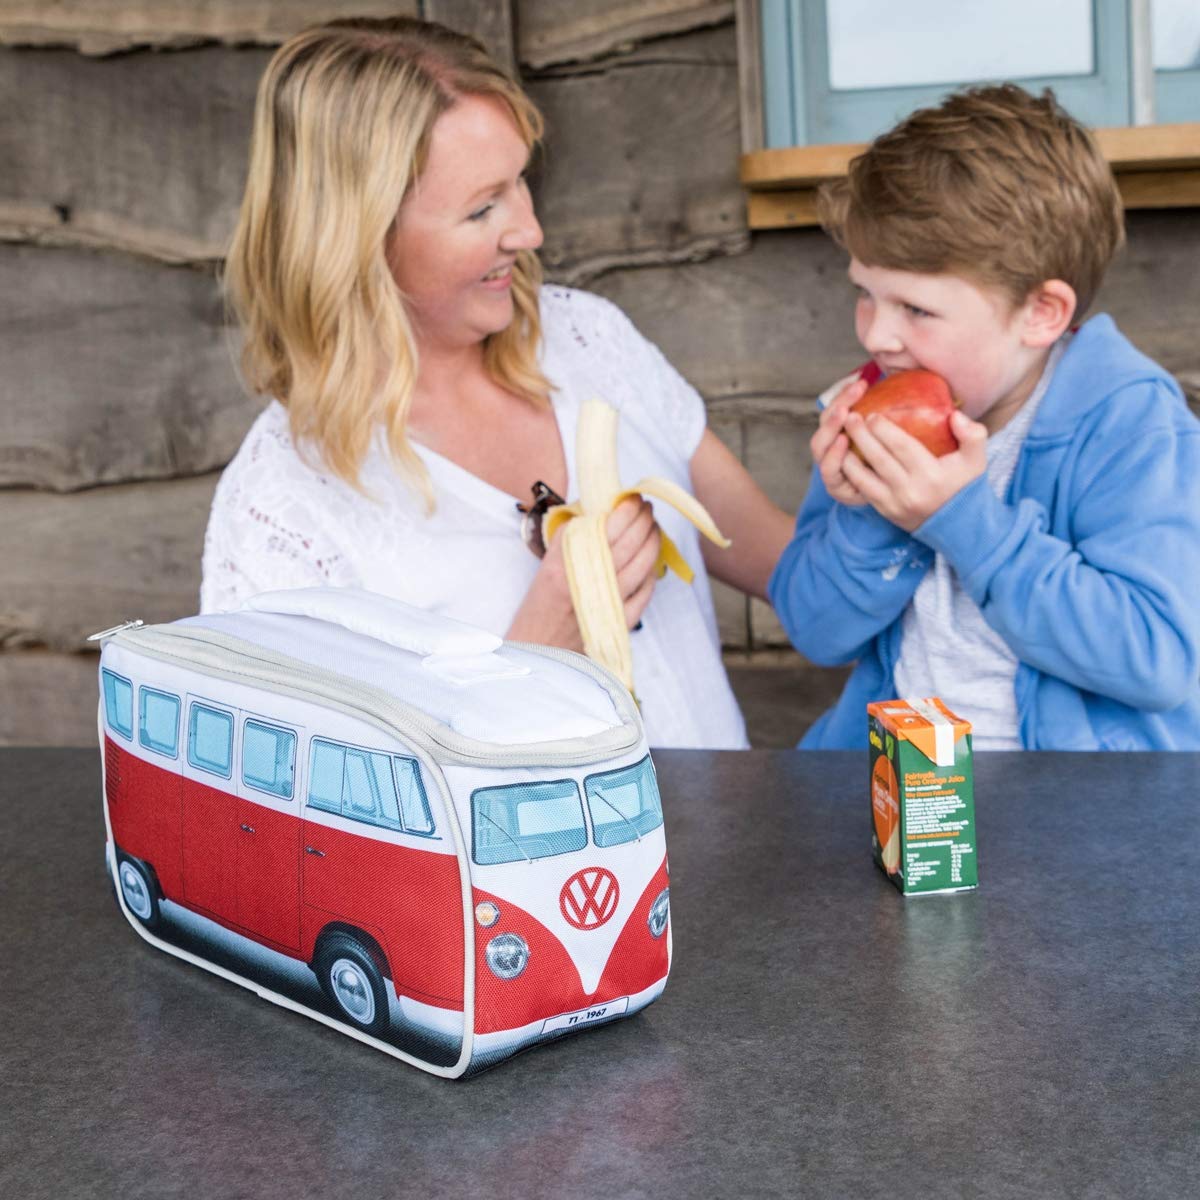 Volkswagen Camper Van Insulated Lunch Bag – Official VW Cooler Lunch Box with Carry Handle – Multiple Colours - Opticdeals